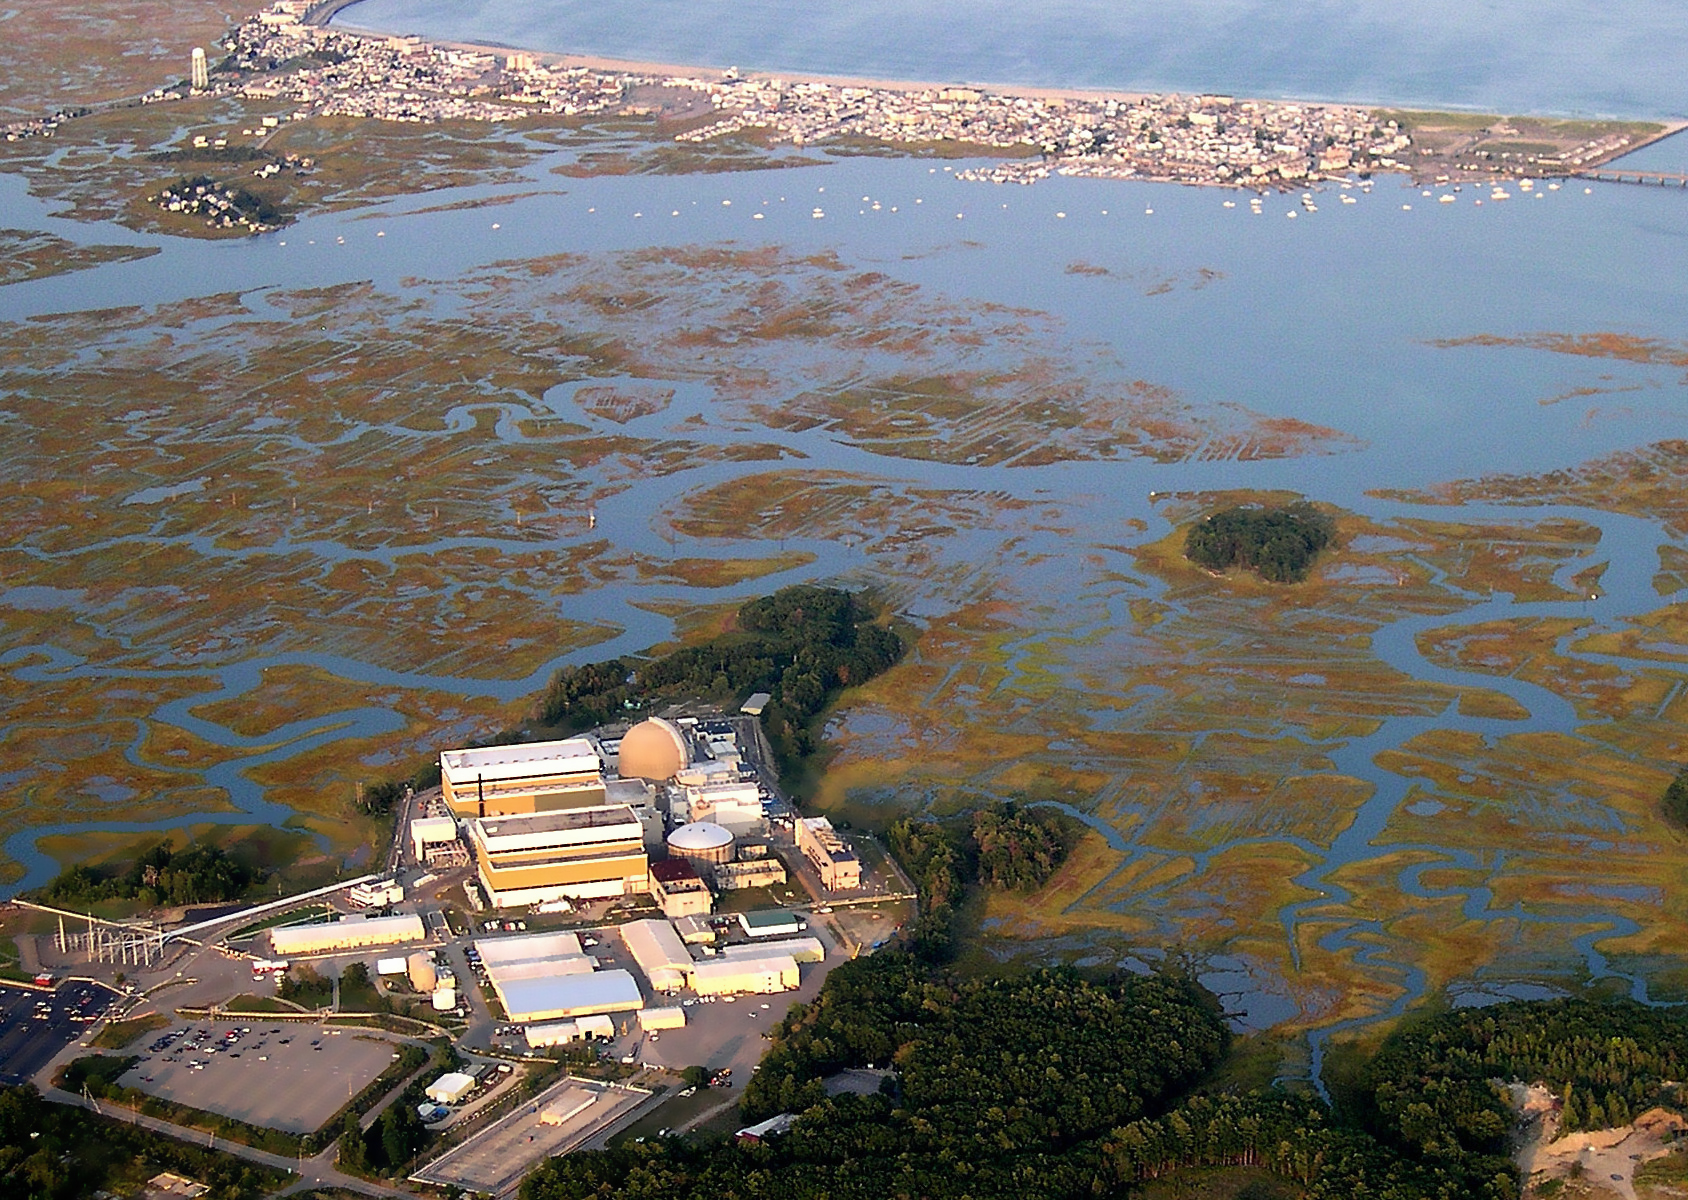 								 								 Seabrook Station is uniquely vulnerable to storm surge inundation. Aerial photo courtesy of Ed Friedman, POV Heli-services					 								 														